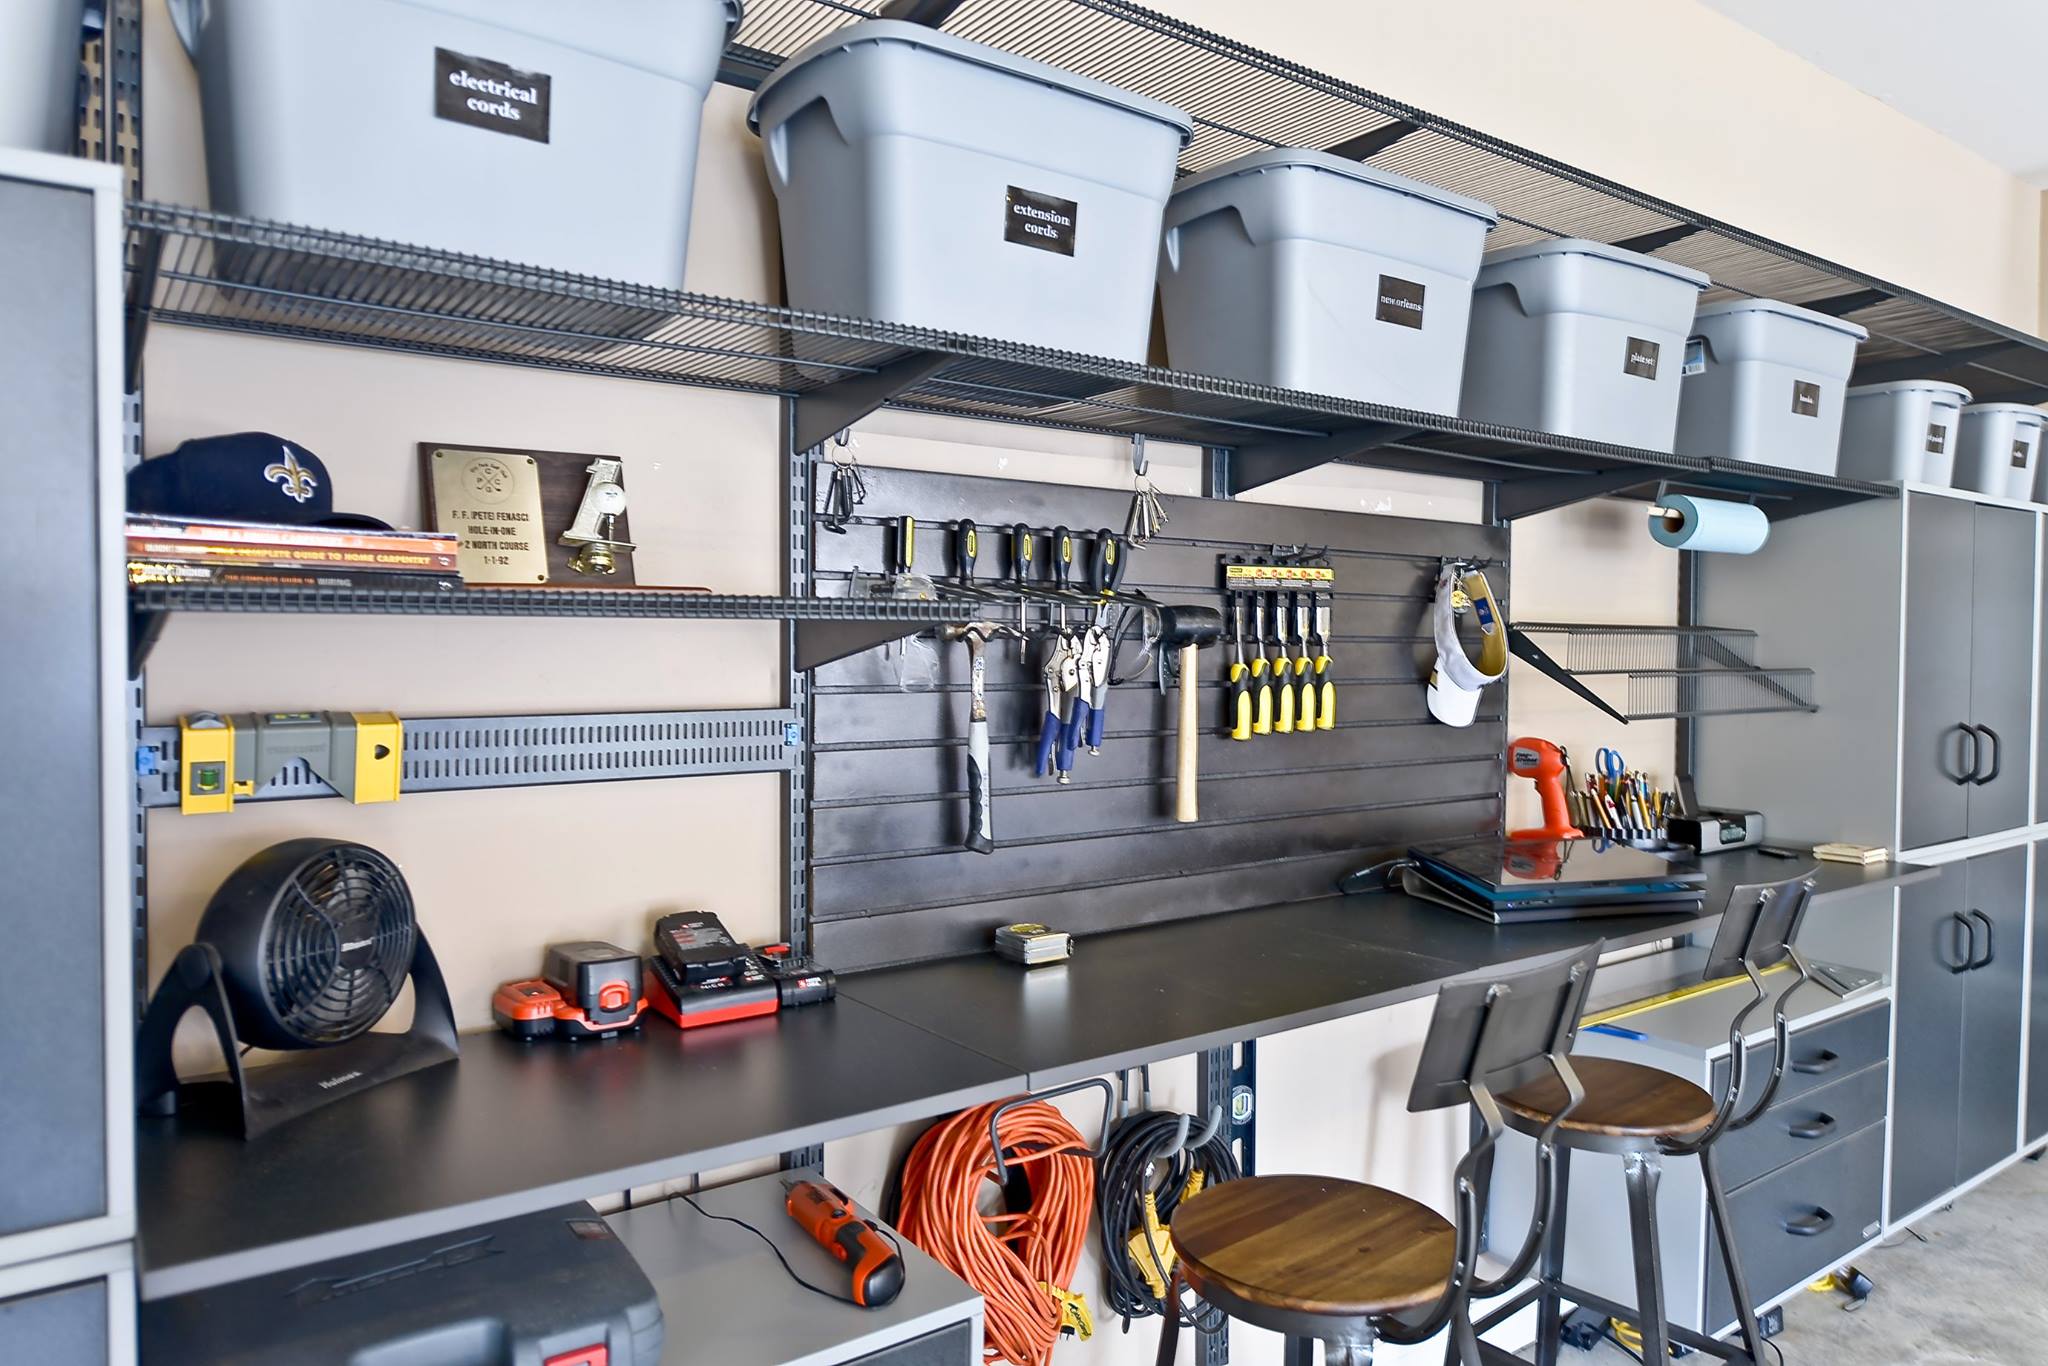 How to Find the Perfect Garage Storage Rail System Online